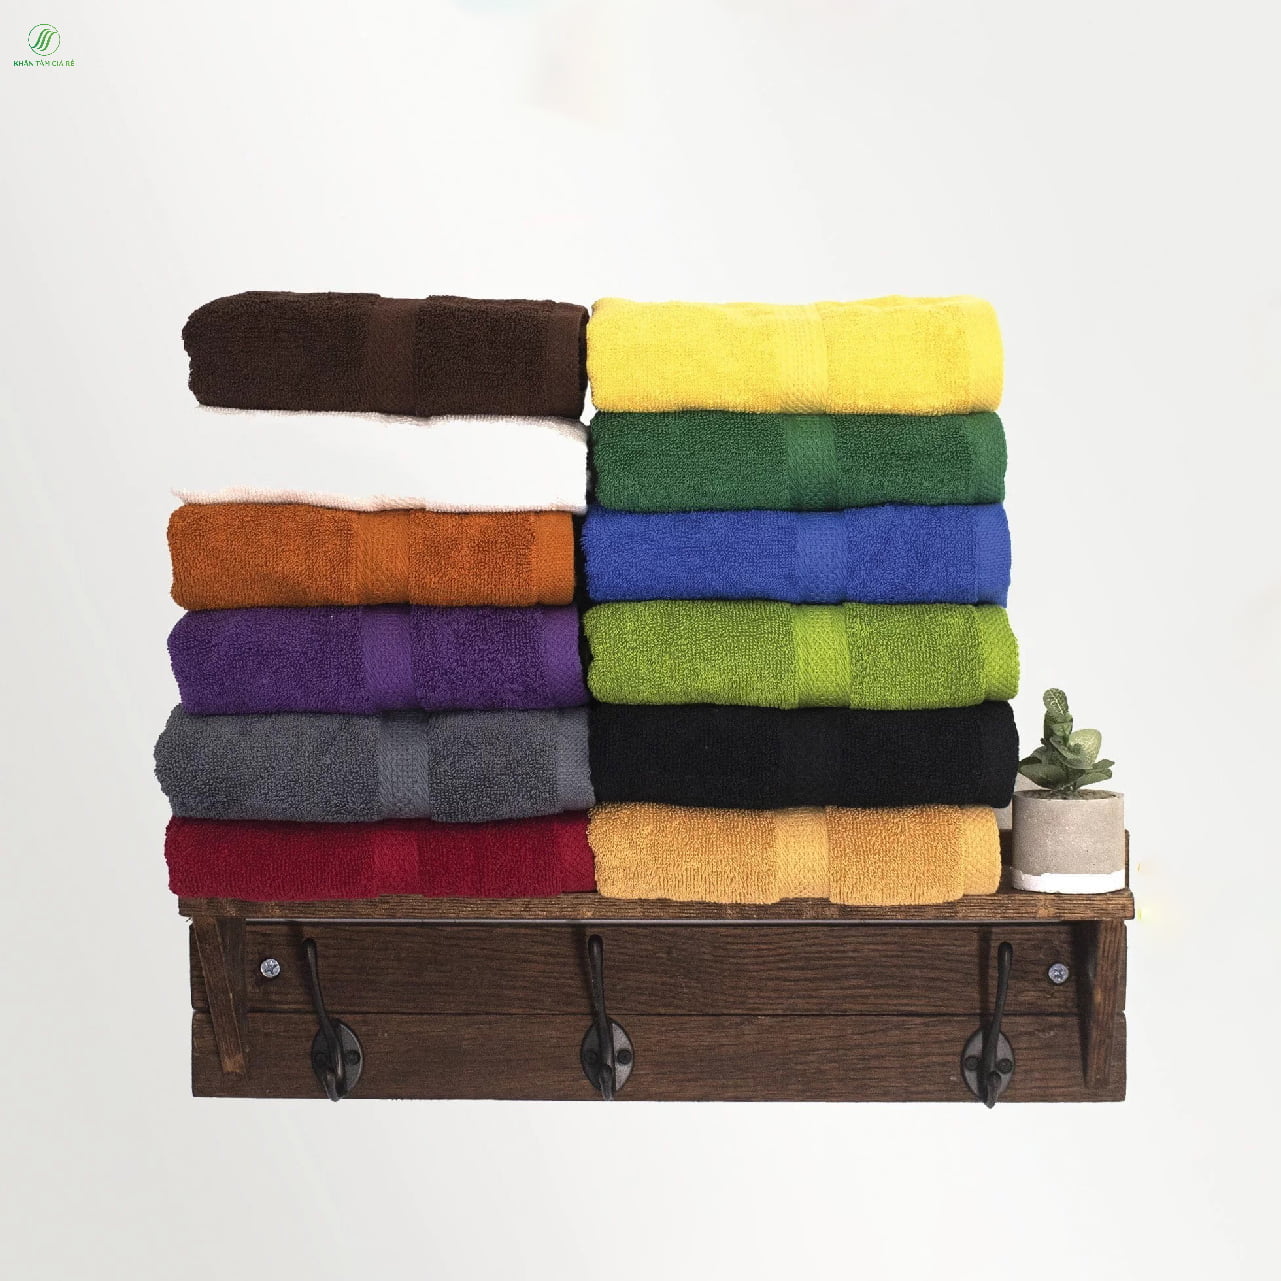 You need to consider the color, materials when buying towels Spa